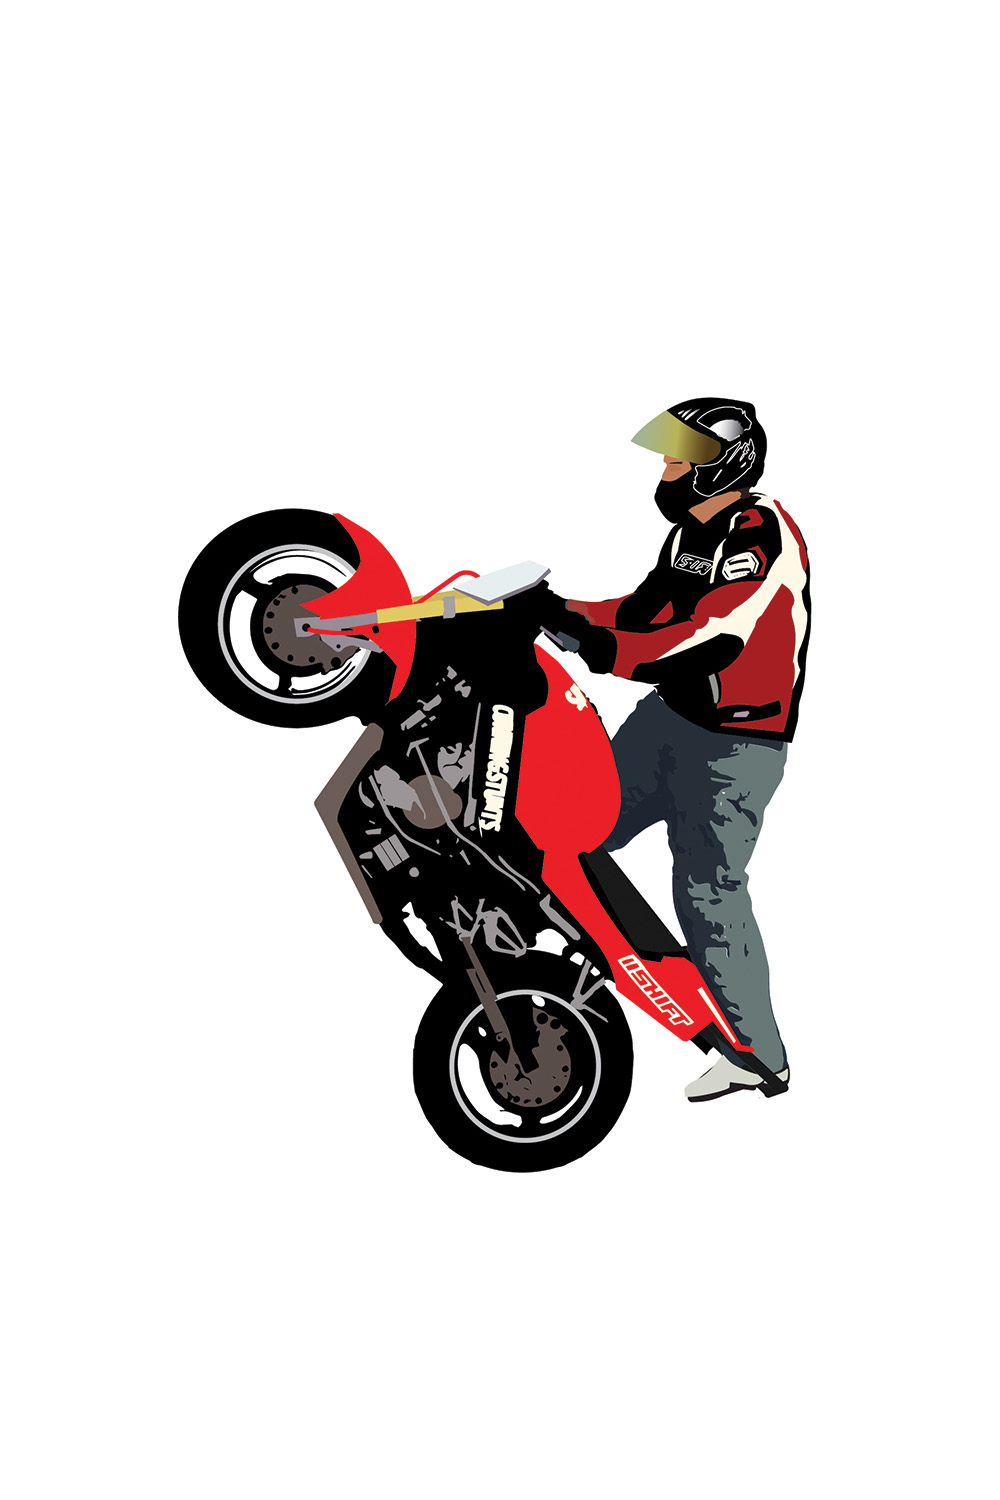 Real Race BMX Cycle Stunt Game - Apps on Google Play